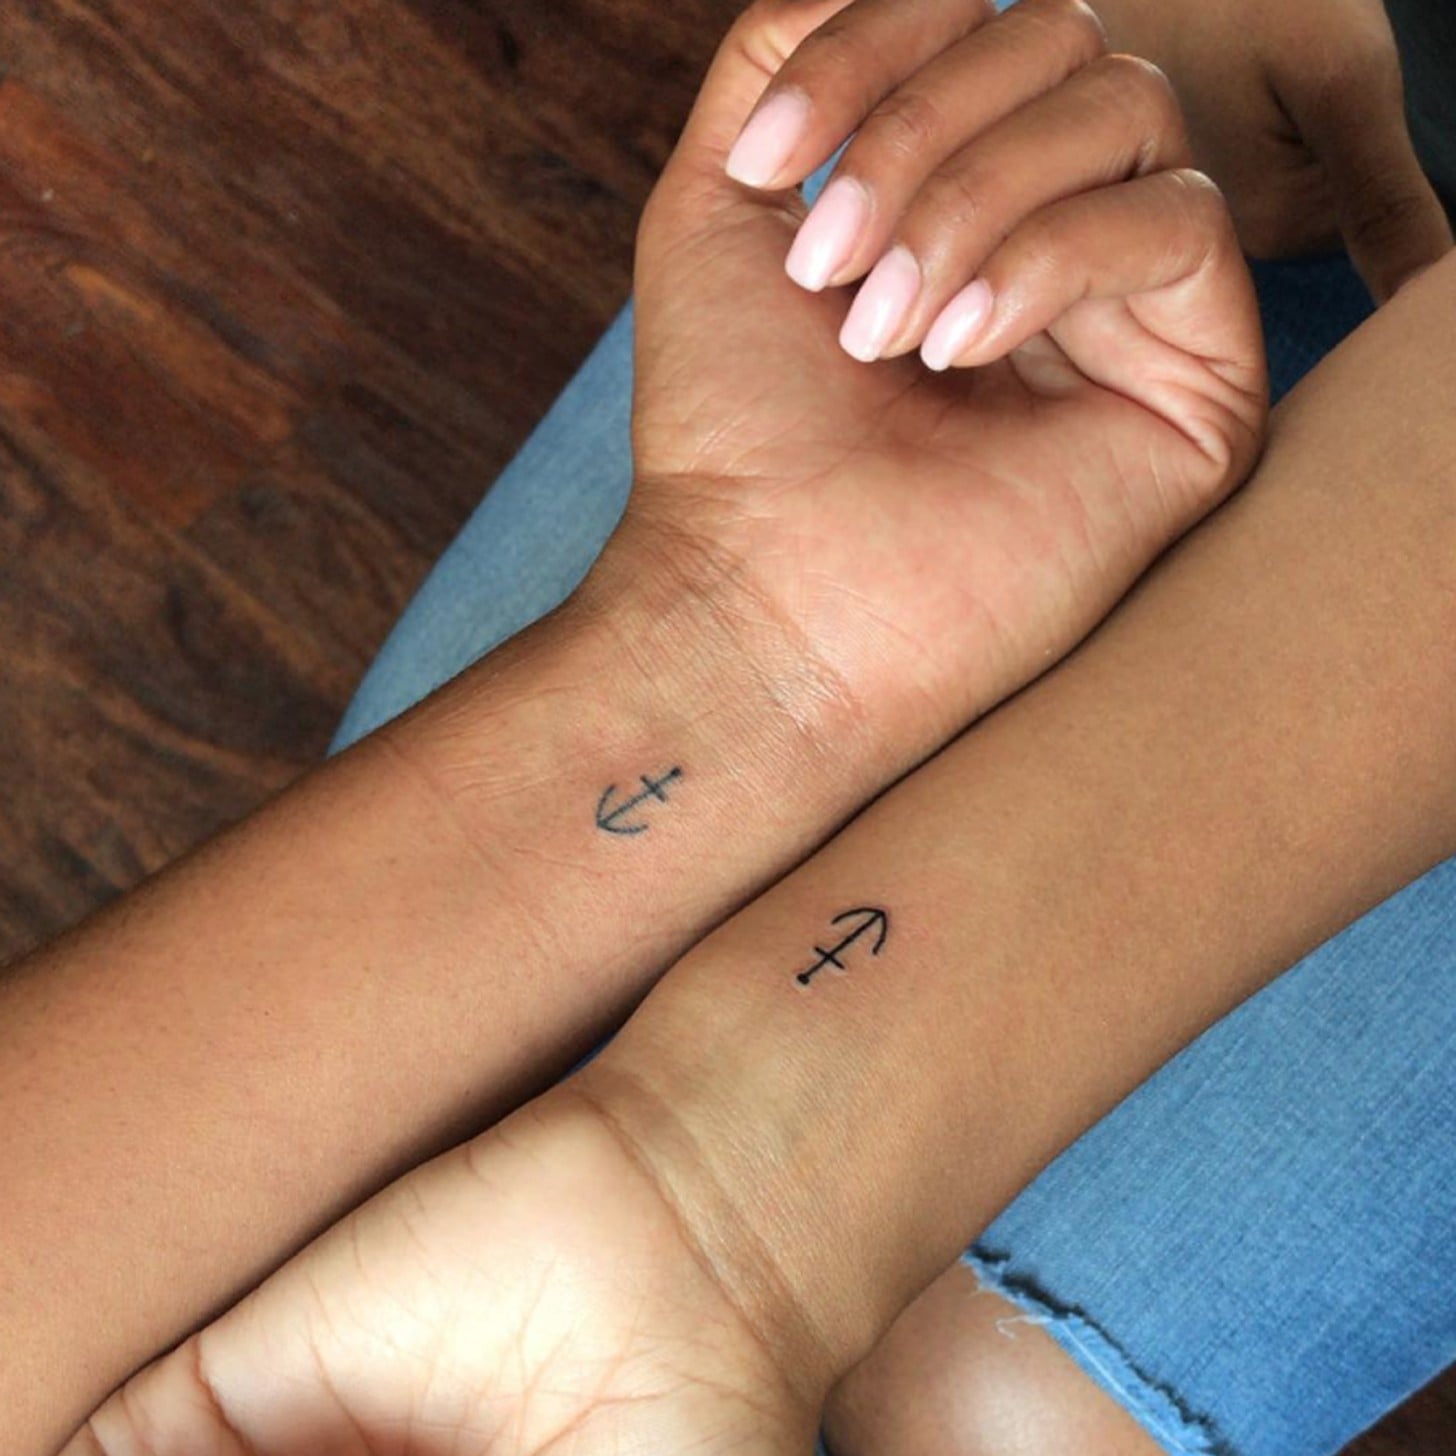 black tattoos - best friend tattoo small supercute tattoo by vinay jharia  for appoinments contact 9981271965 ormail us at harryblacktattoos@gmail.com  for more artwork visit www.harryblacktattoos.com #friendshipgoals #cute  #supercutetattoos ...